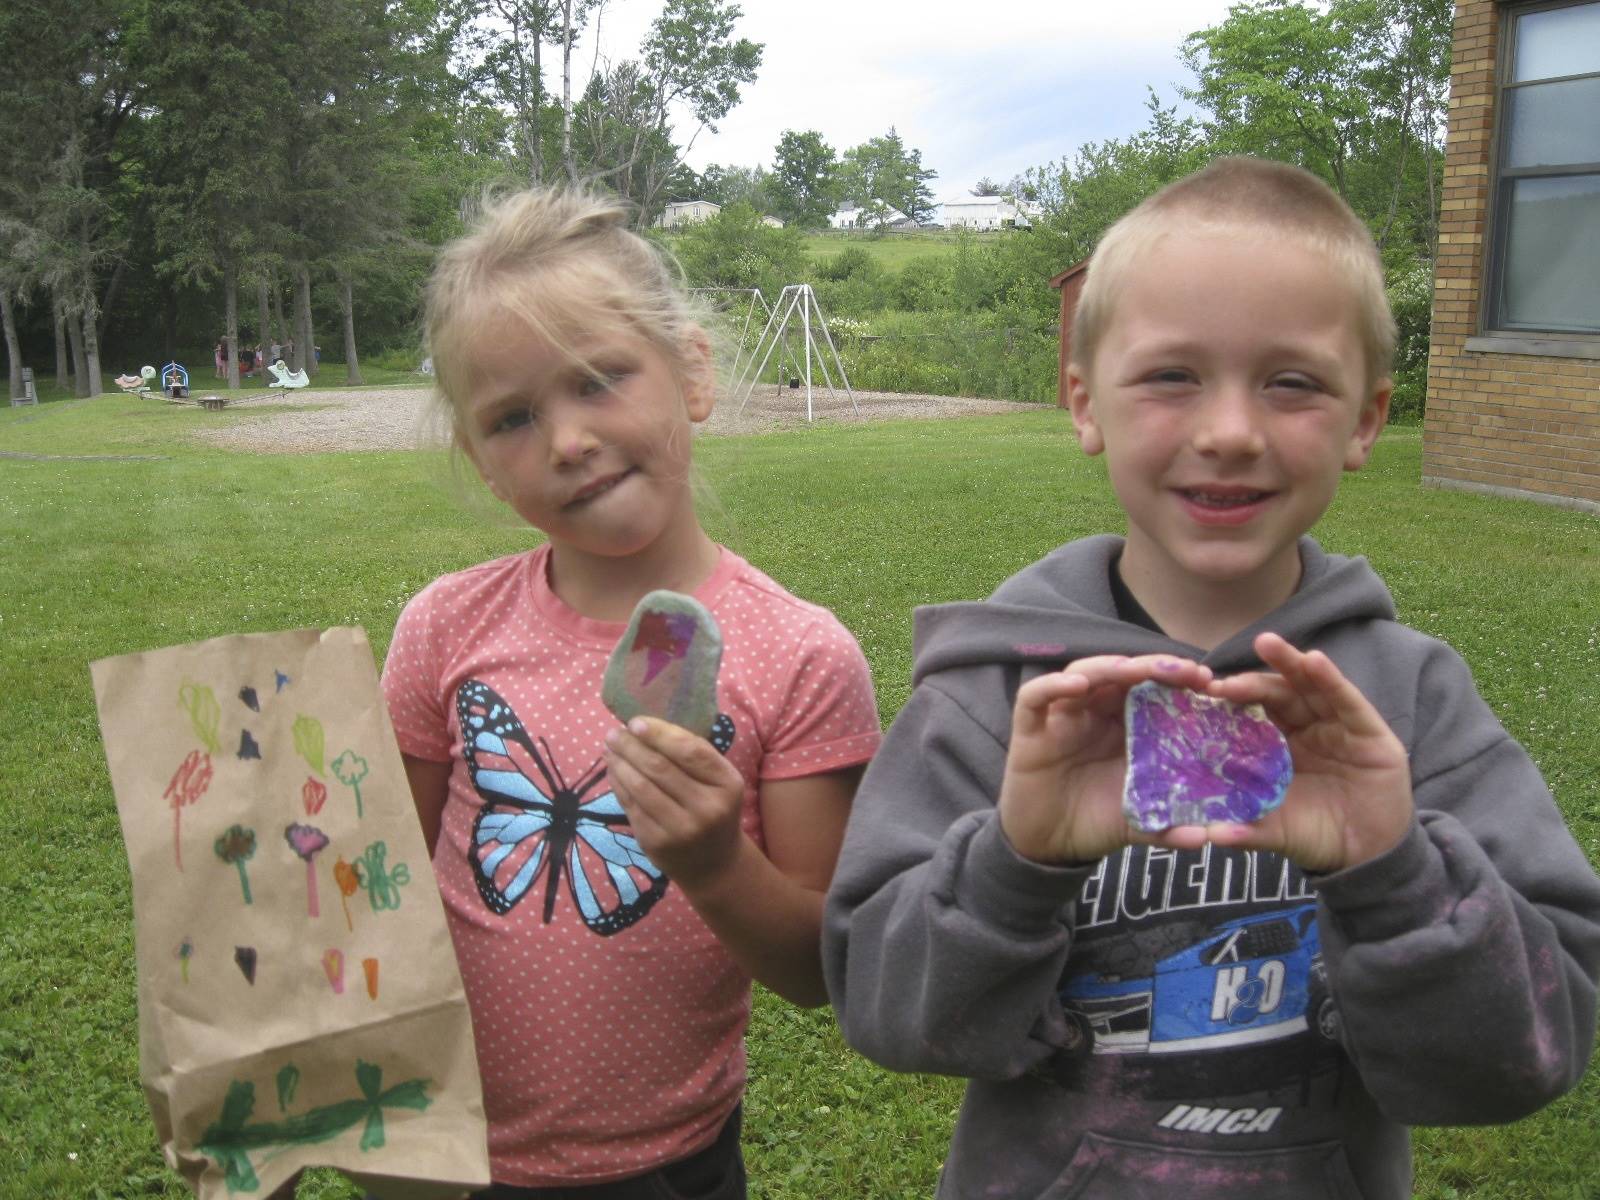 Students show decorated bag and painted rock.